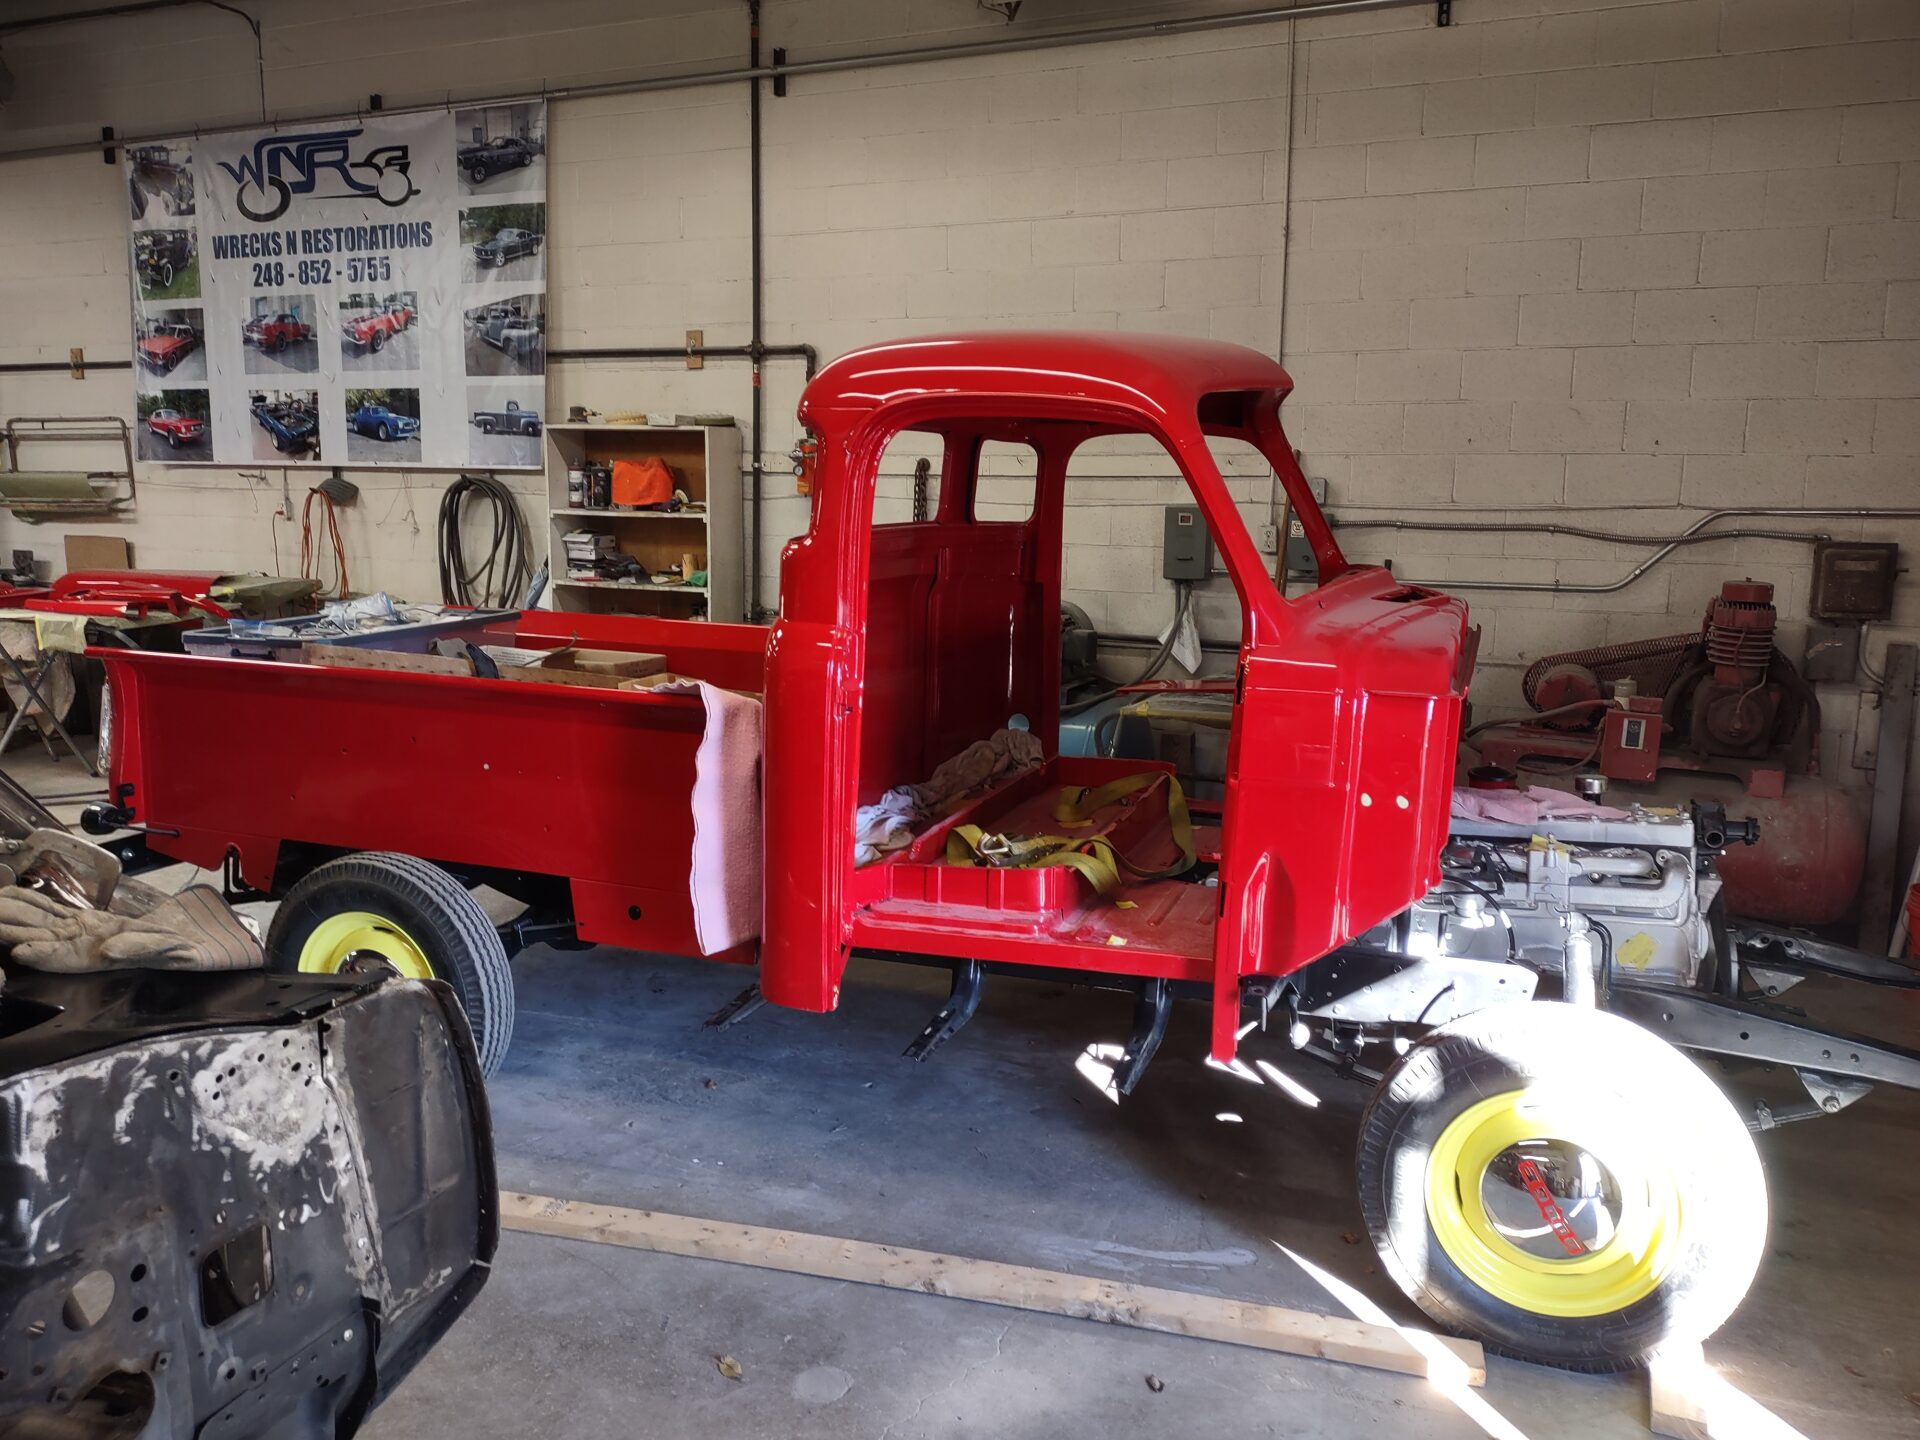 A partially completed 1952 Dodge B3B model